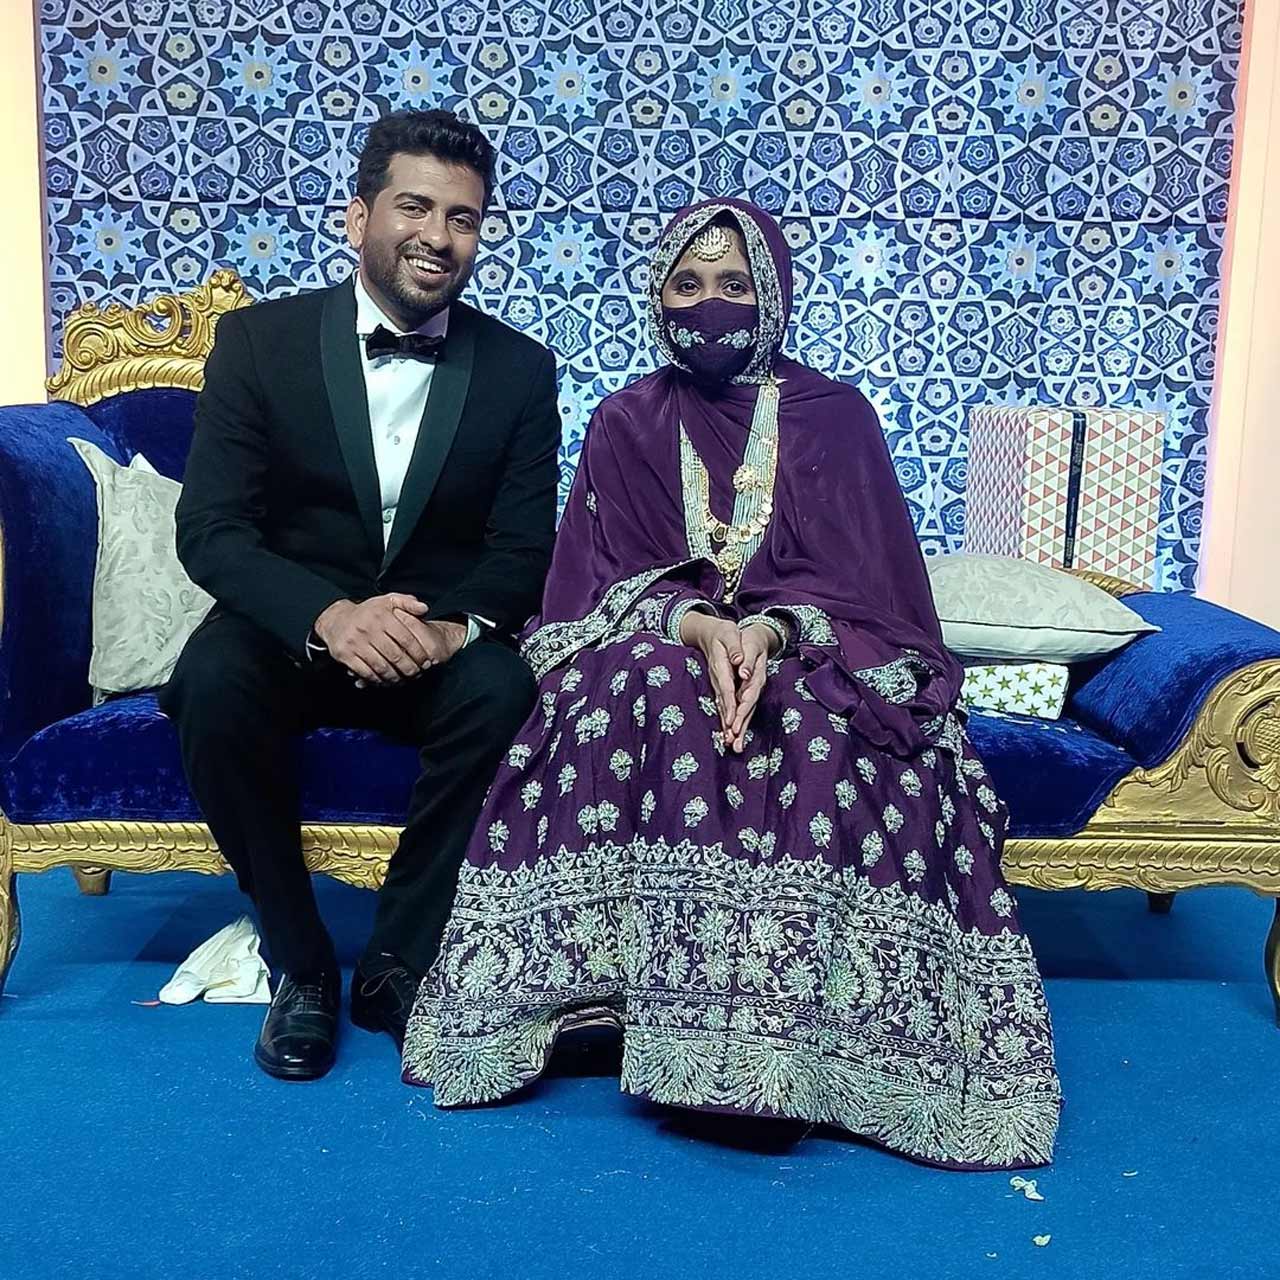 Talking about the reception, Khatija donned a purple lehenga while Riyasdeen was dressed in a black suit with a bowtie. AR Rahman wore a kurta-pyjama paired with a blue jacket while his son Ameen was in a black sherwani.